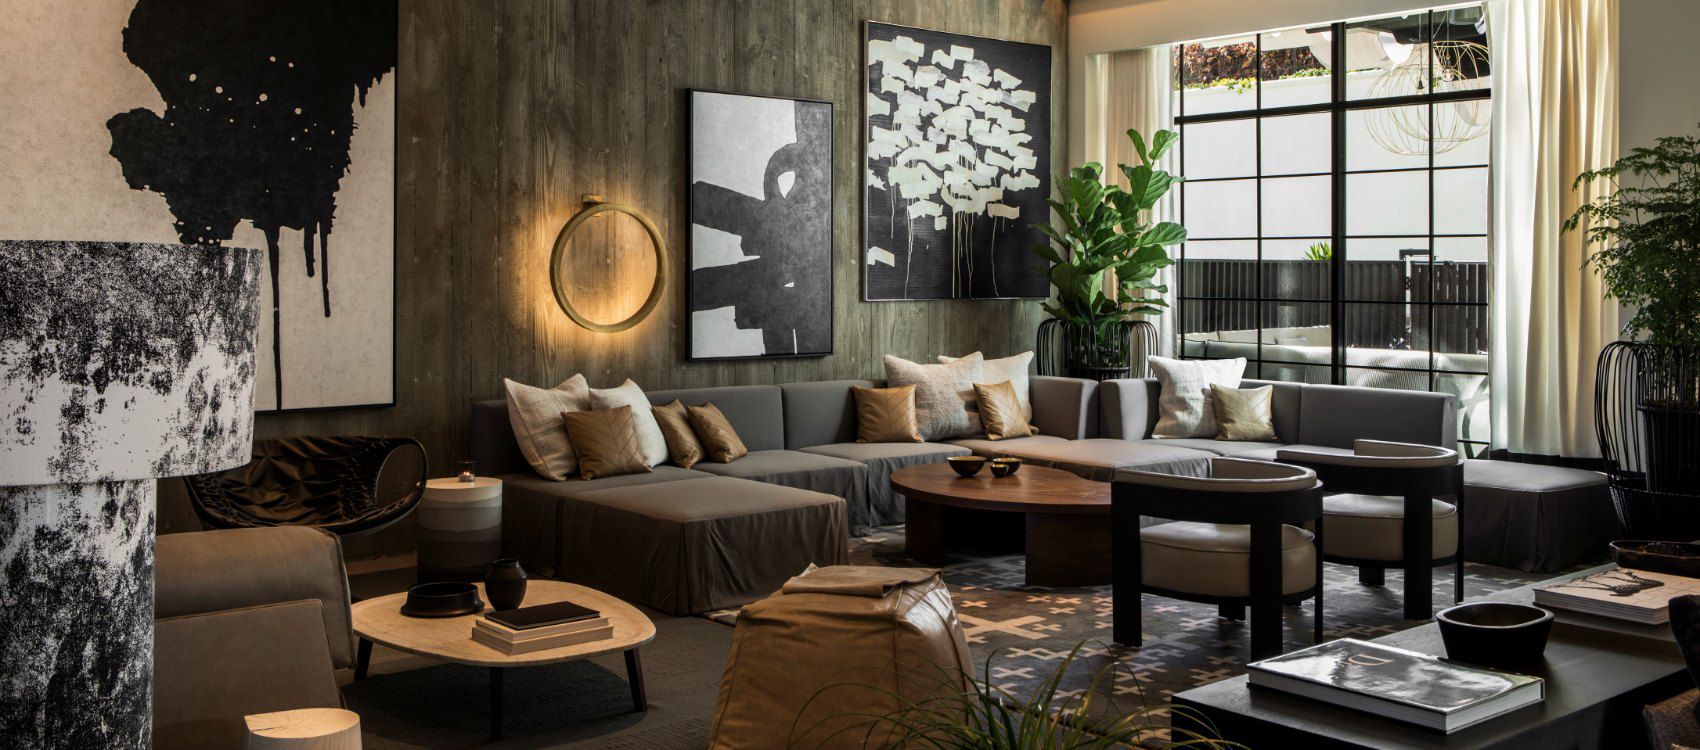 living room lobby at la peer hotel with black and white decor